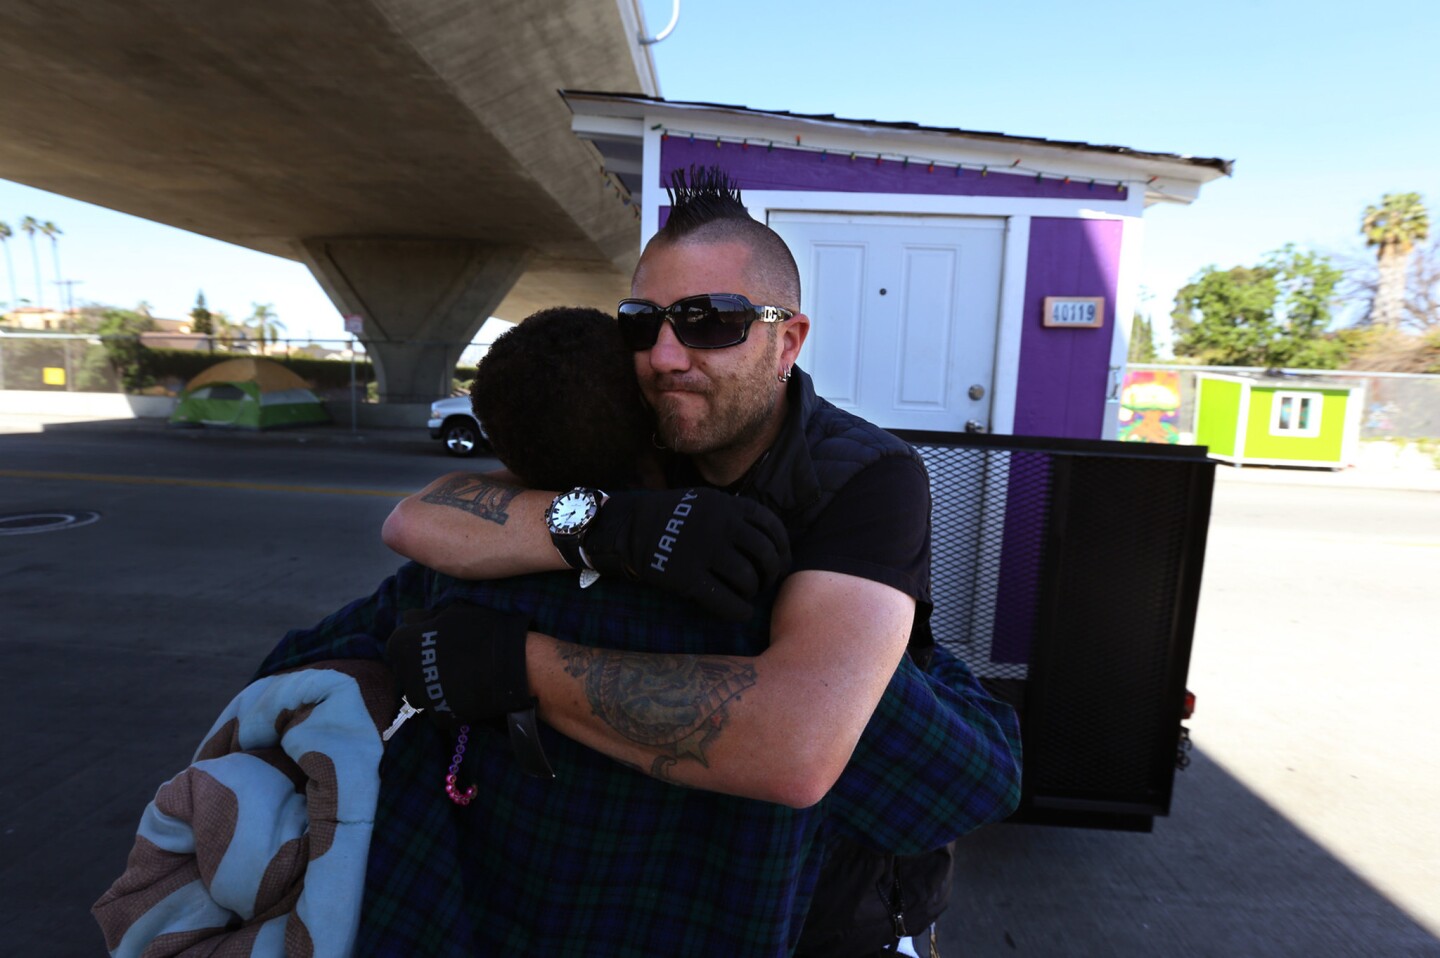 Julia Briggs Cannon, 58, left, receives a hug from Elvis Summers, who built the tiny houses and donated them. He's moving Cannon's house to storage before the city can impound it.